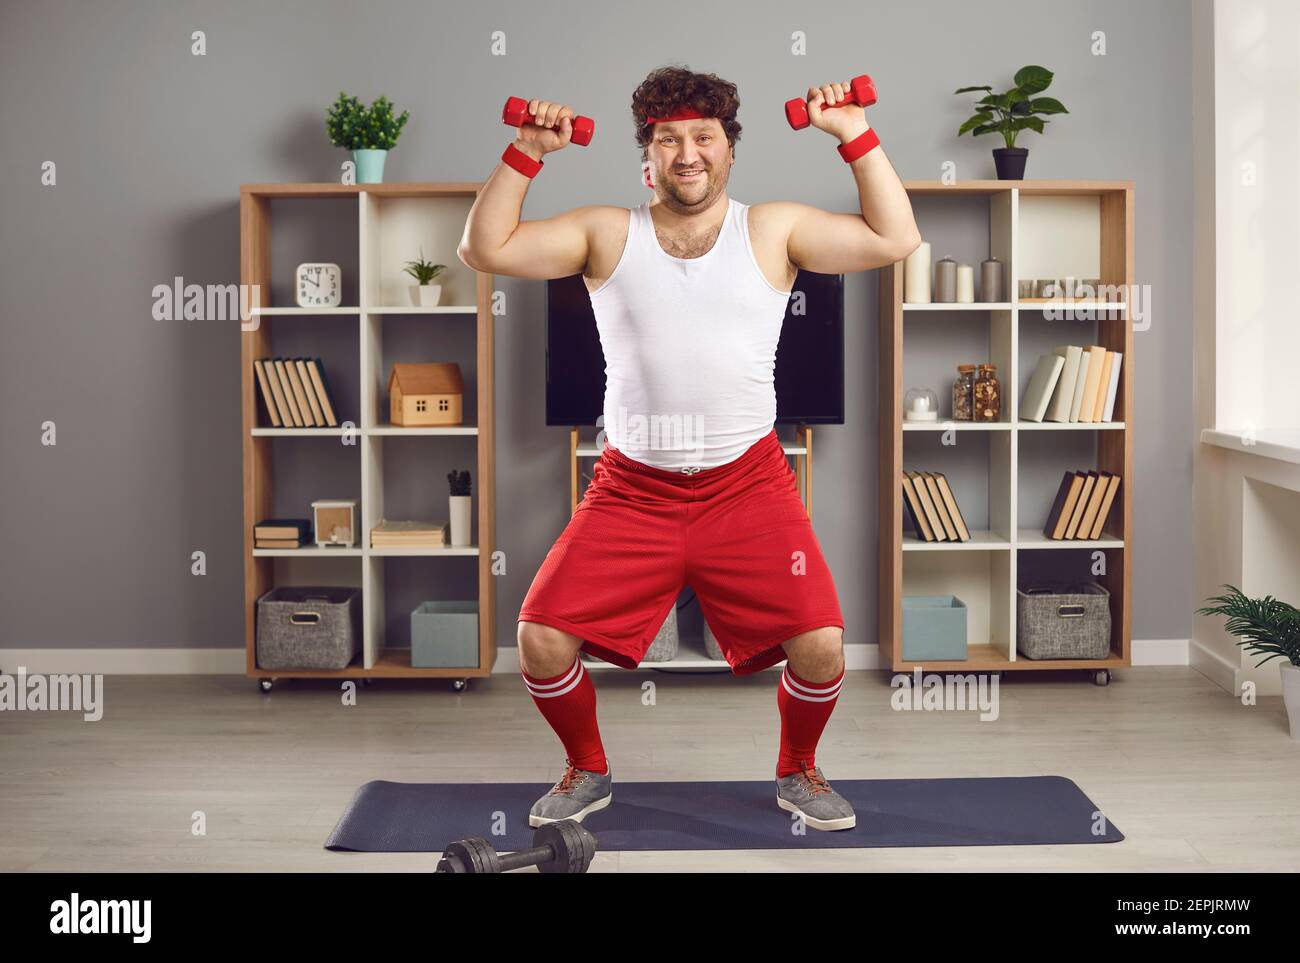 Funny chubby man exercising with dumbbells standing on fitness mat in  living-room Stock Photo - Alamy